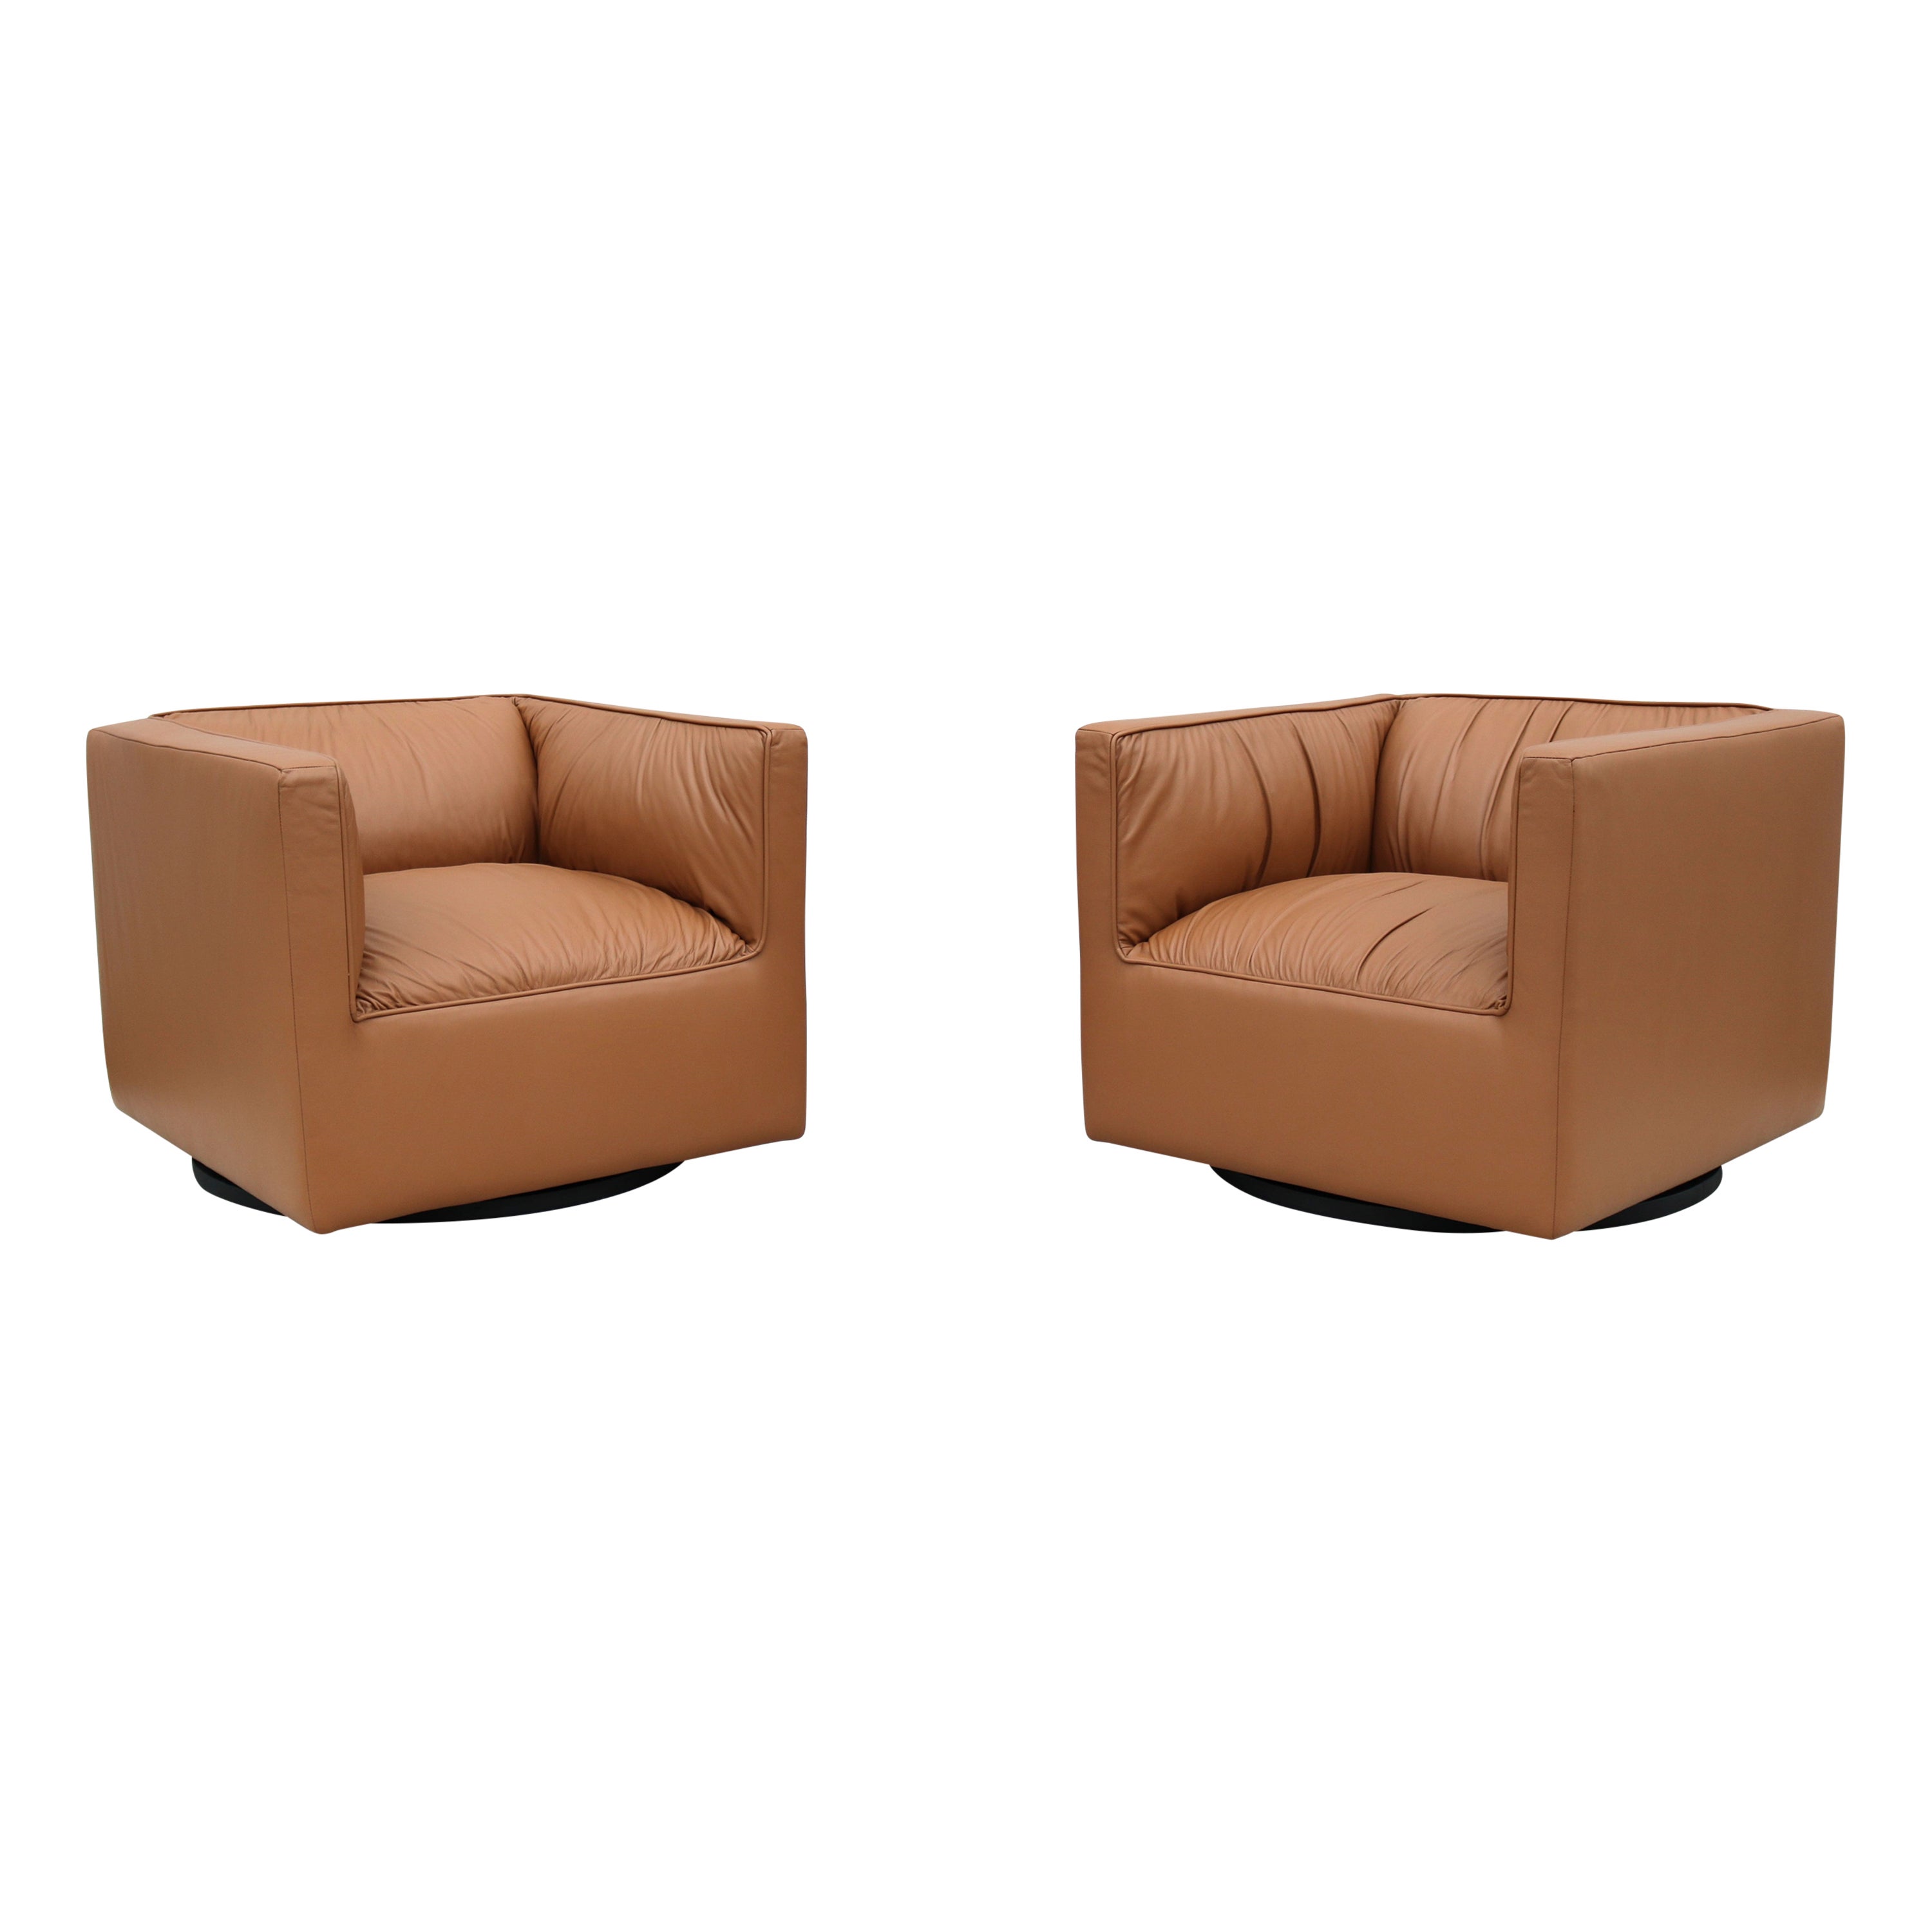 Modern Toan Nguyen for Studio TK Infinito Leather Swivel Lounge Chairs - a Pair For Sale